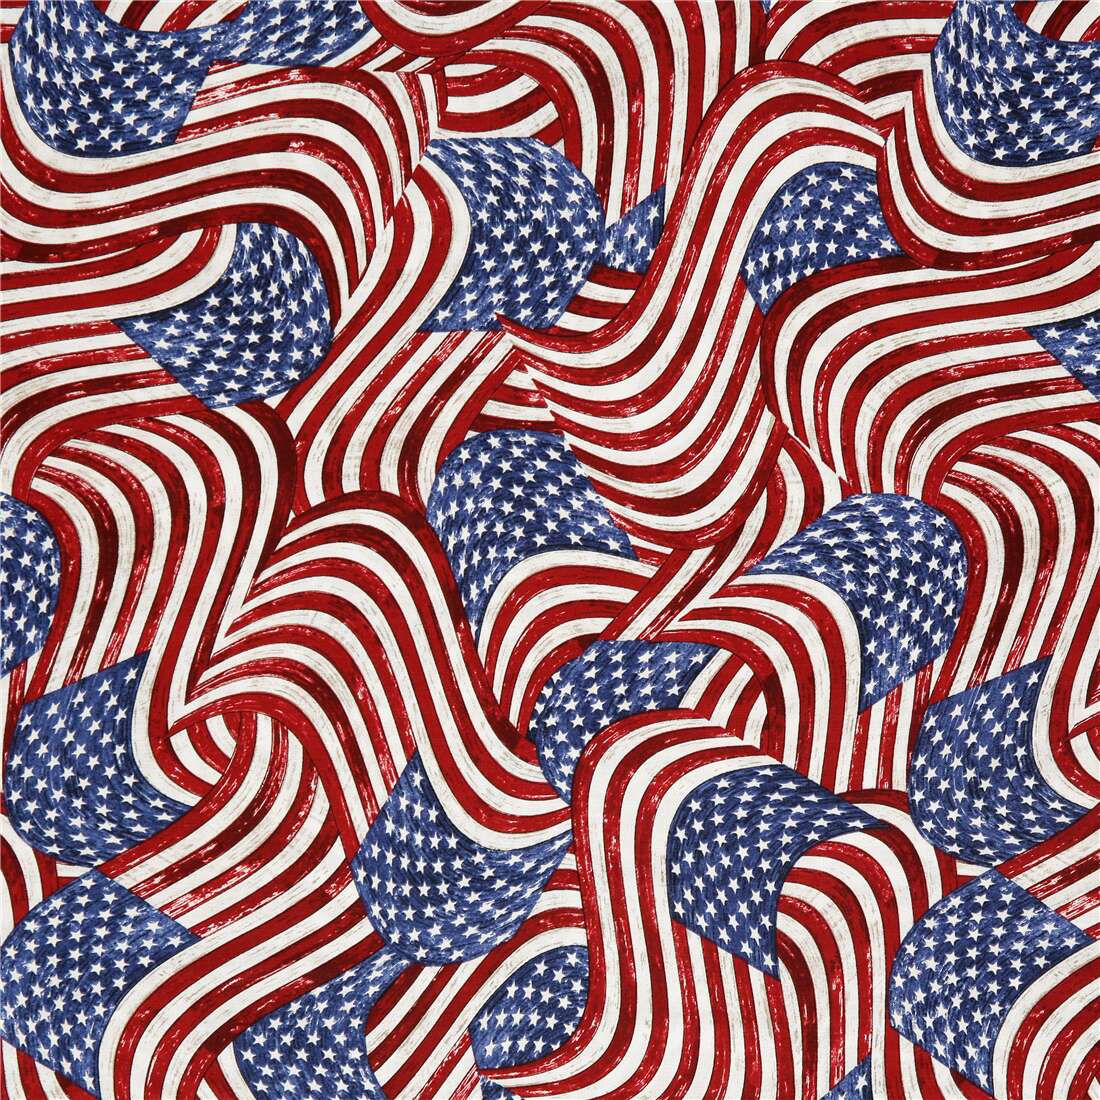 United States Of America Swirling Flags Fabric By Timeless Treasures Modes4u 7455